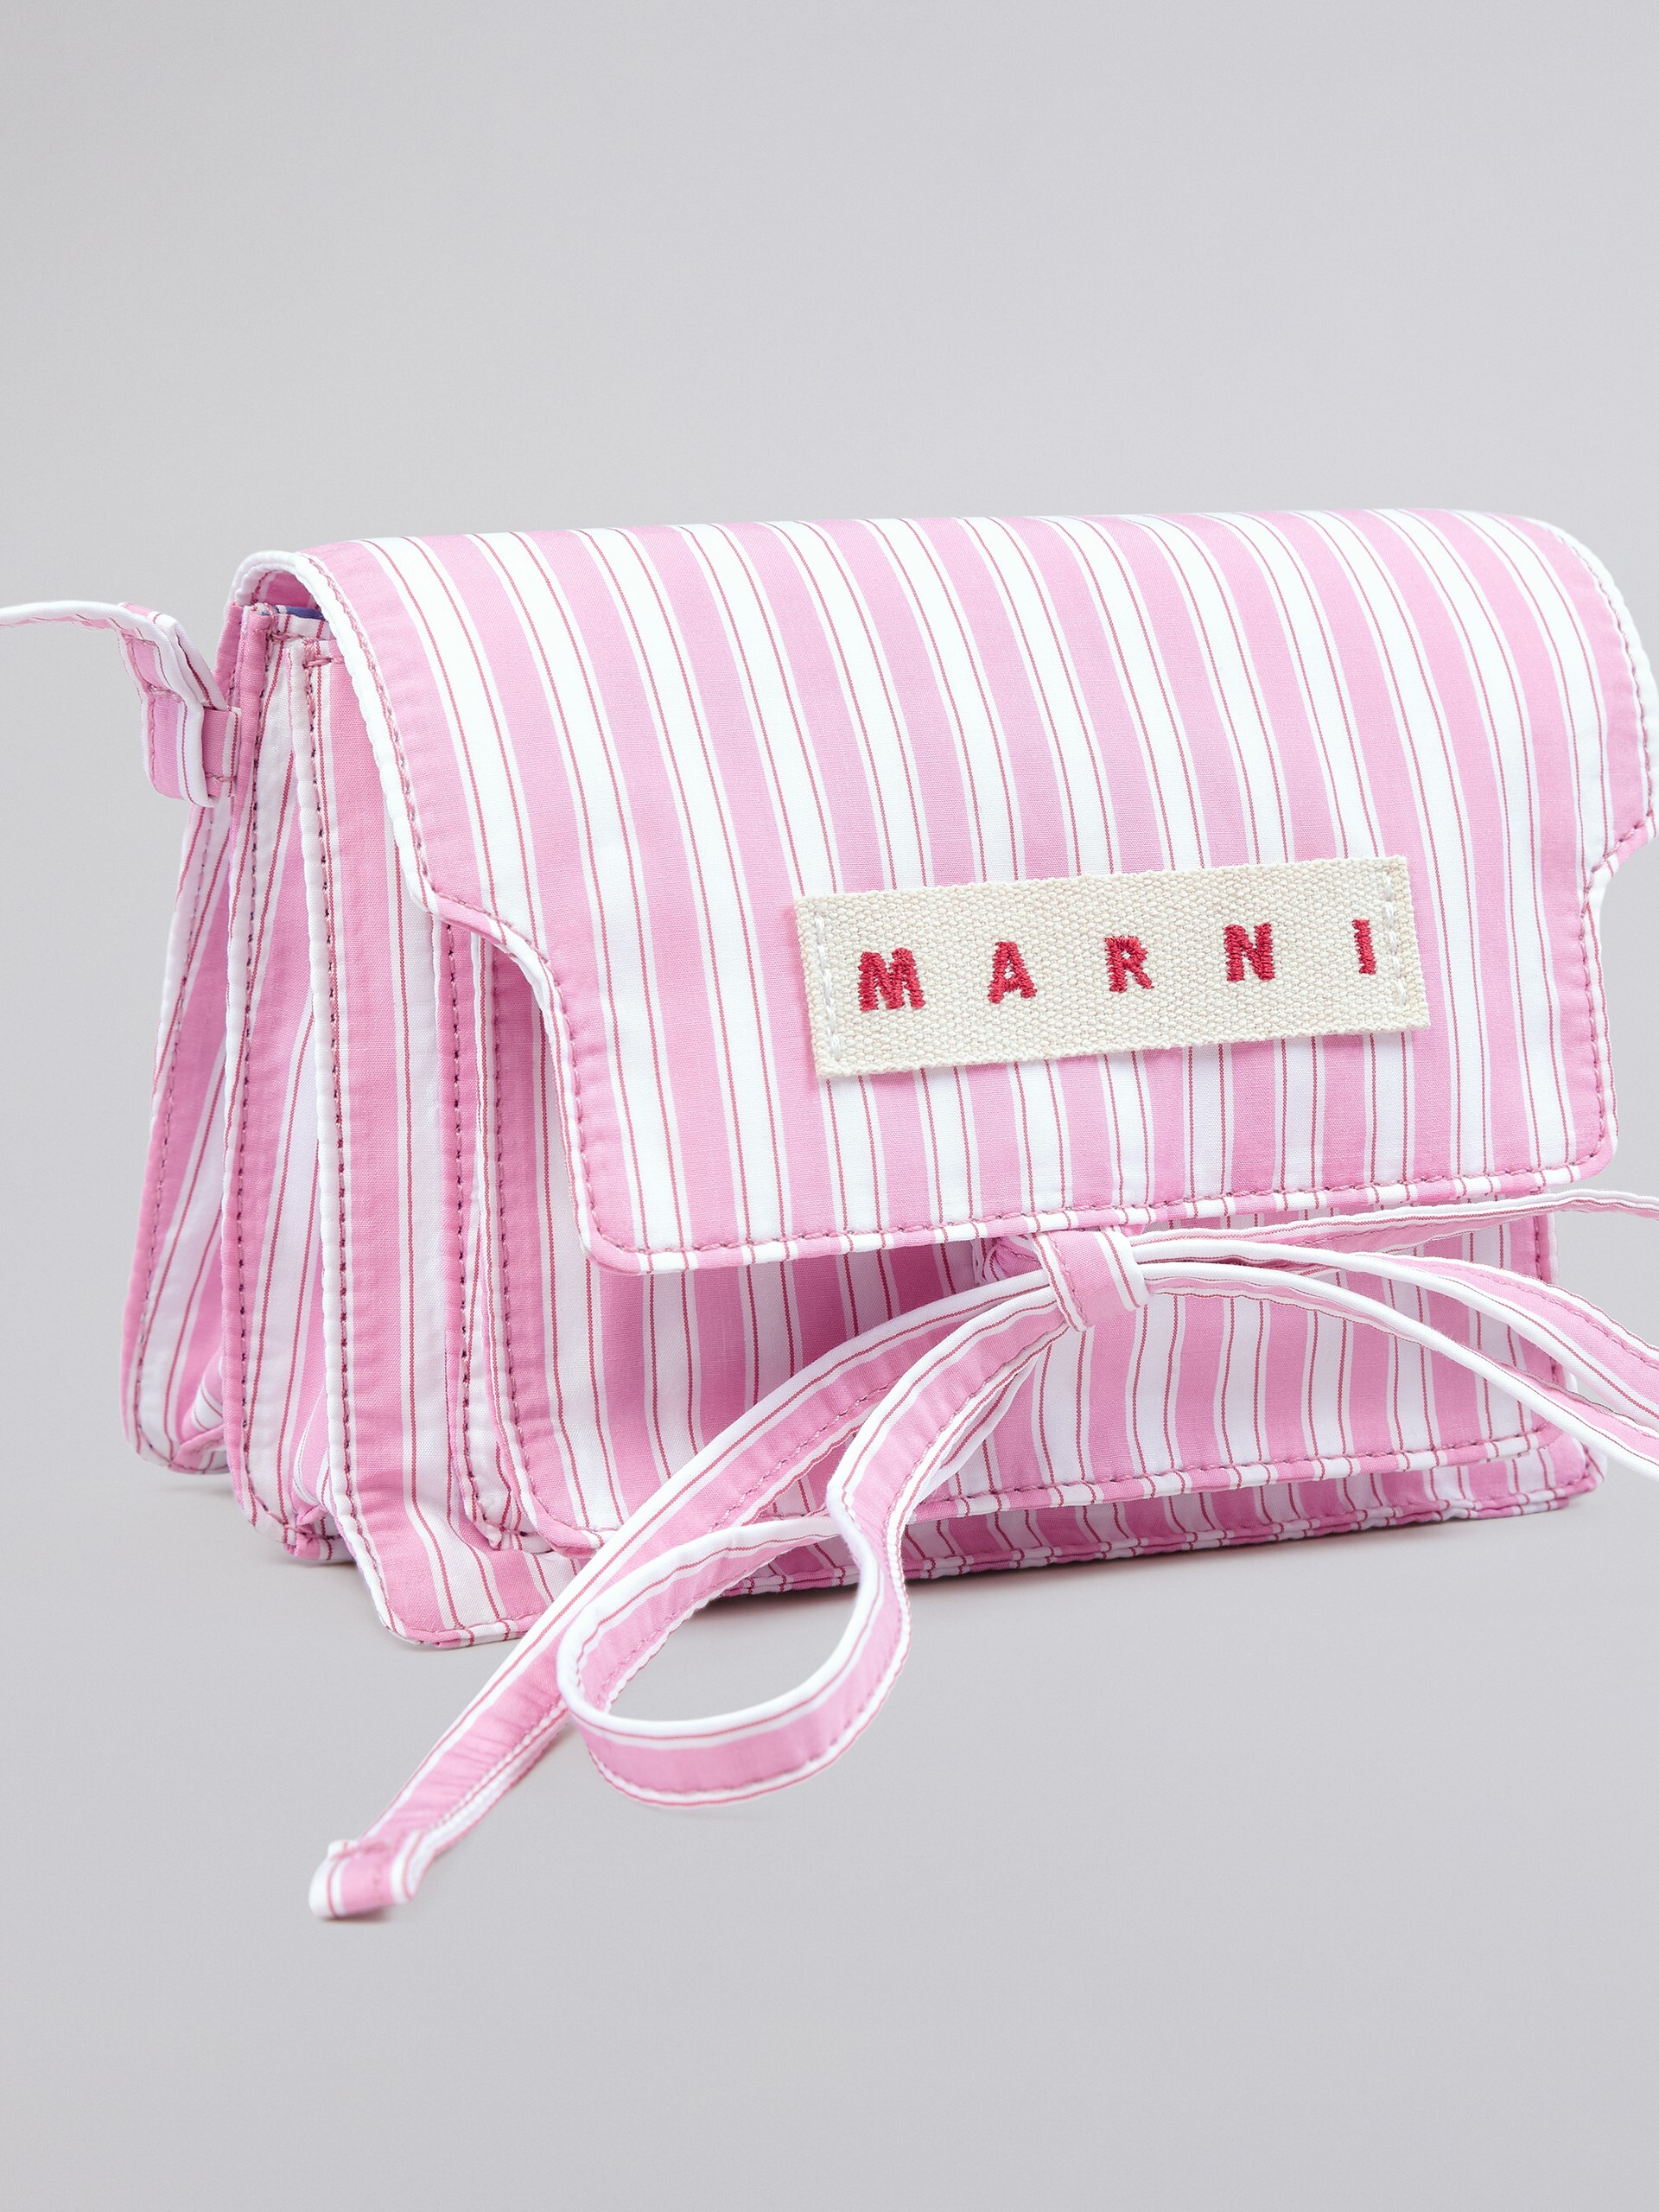 TRUNK SOFT mini bag in pink and white striped poplin - Shoulder Bags - Image 3